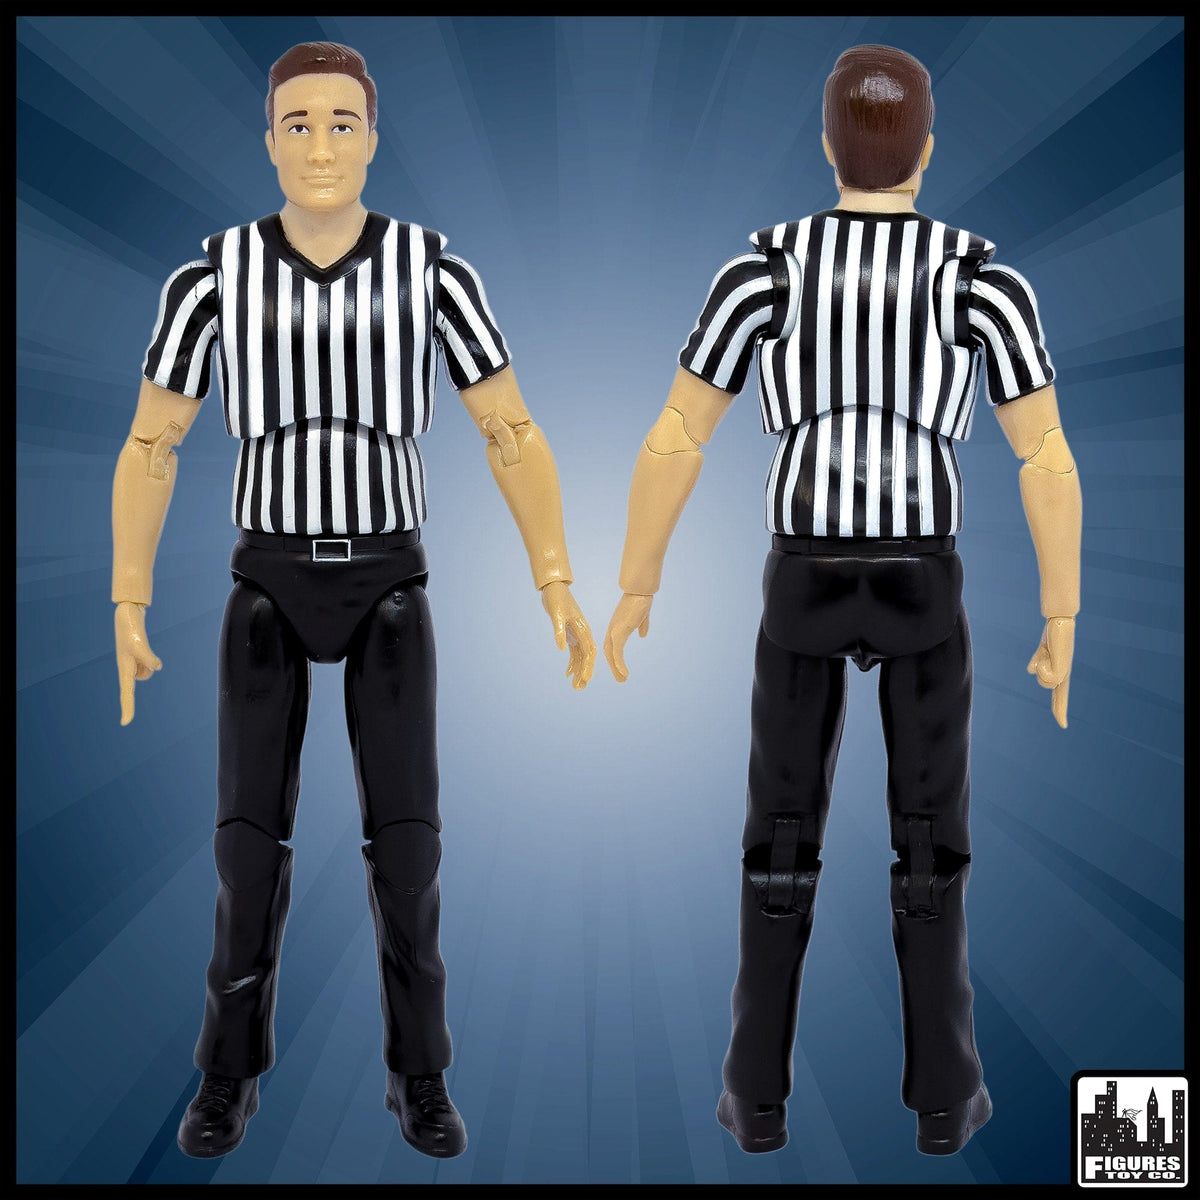 Ultimate Referee With Deluxe Articulation for WWE Wrestling Action Figures